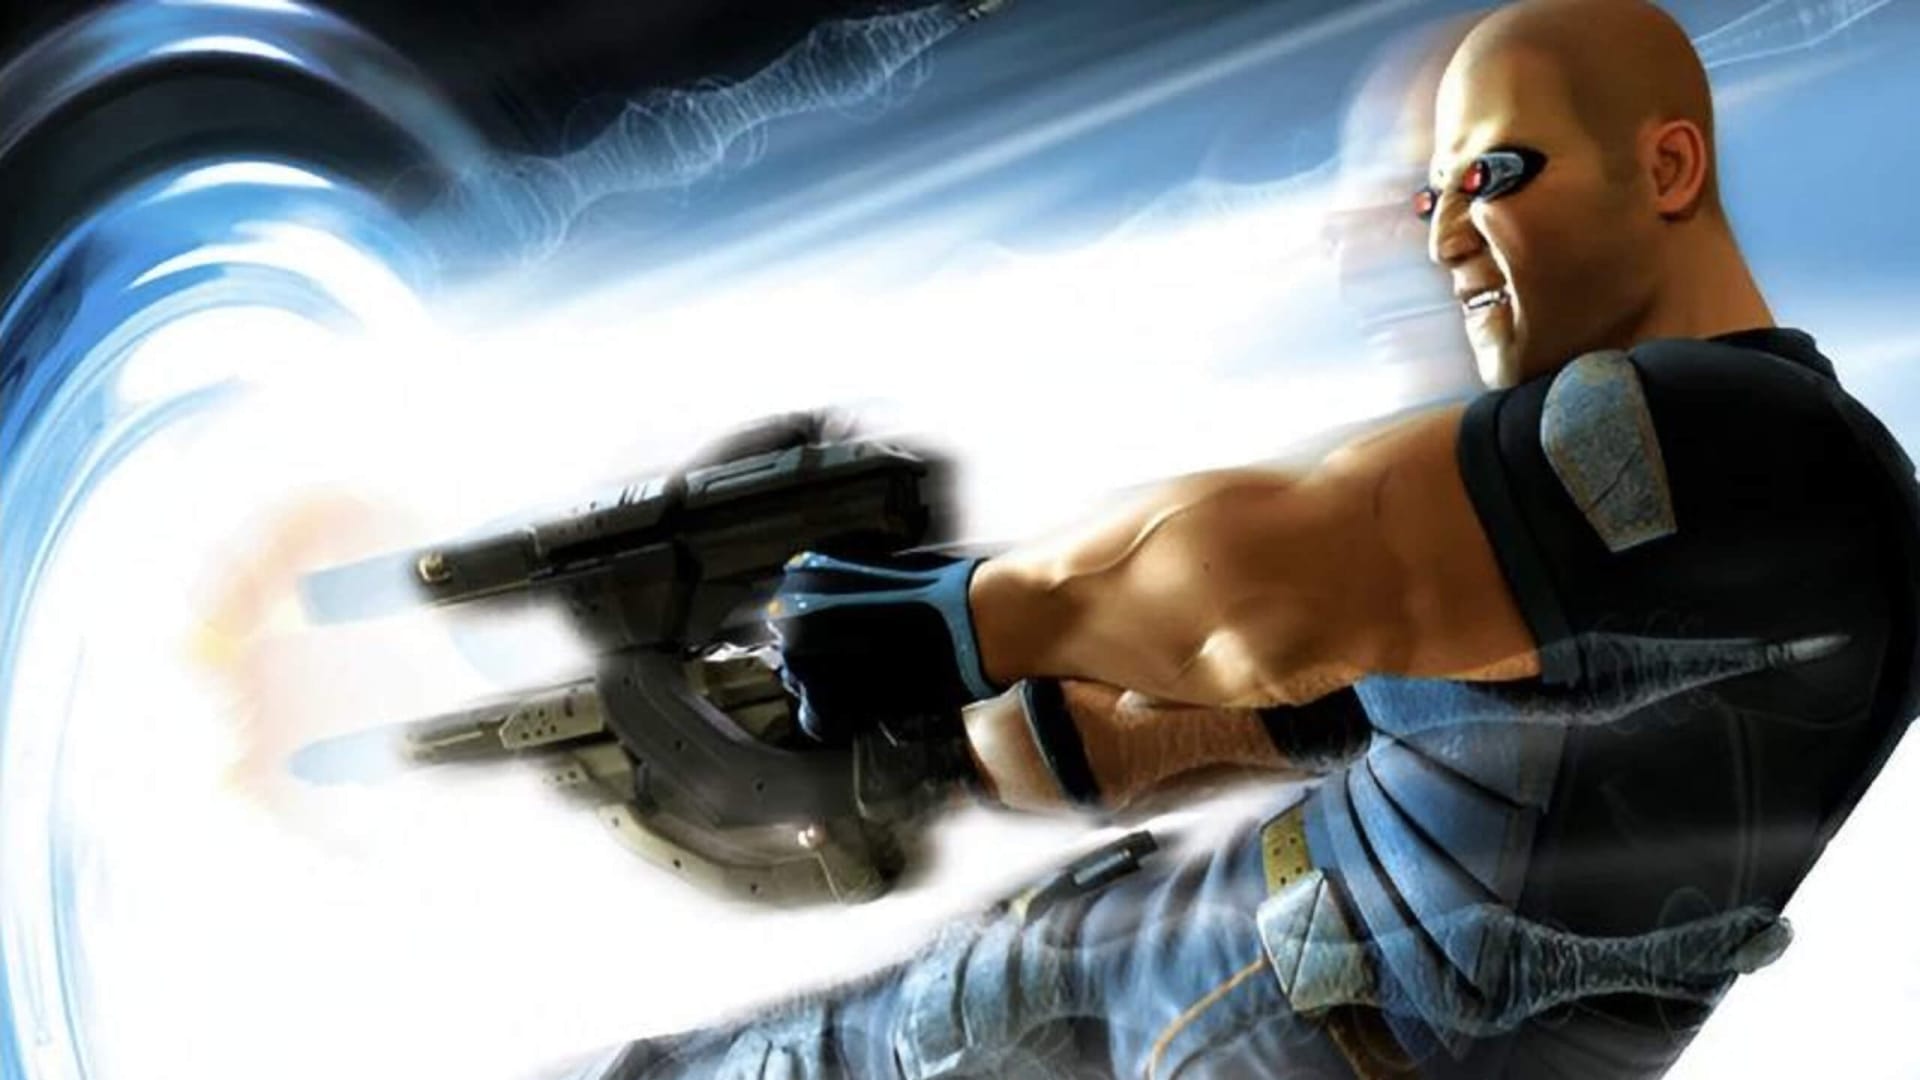 Canceled TimeSplitters Game Footage Seemingly Posted by Ex-Free Radical Employee